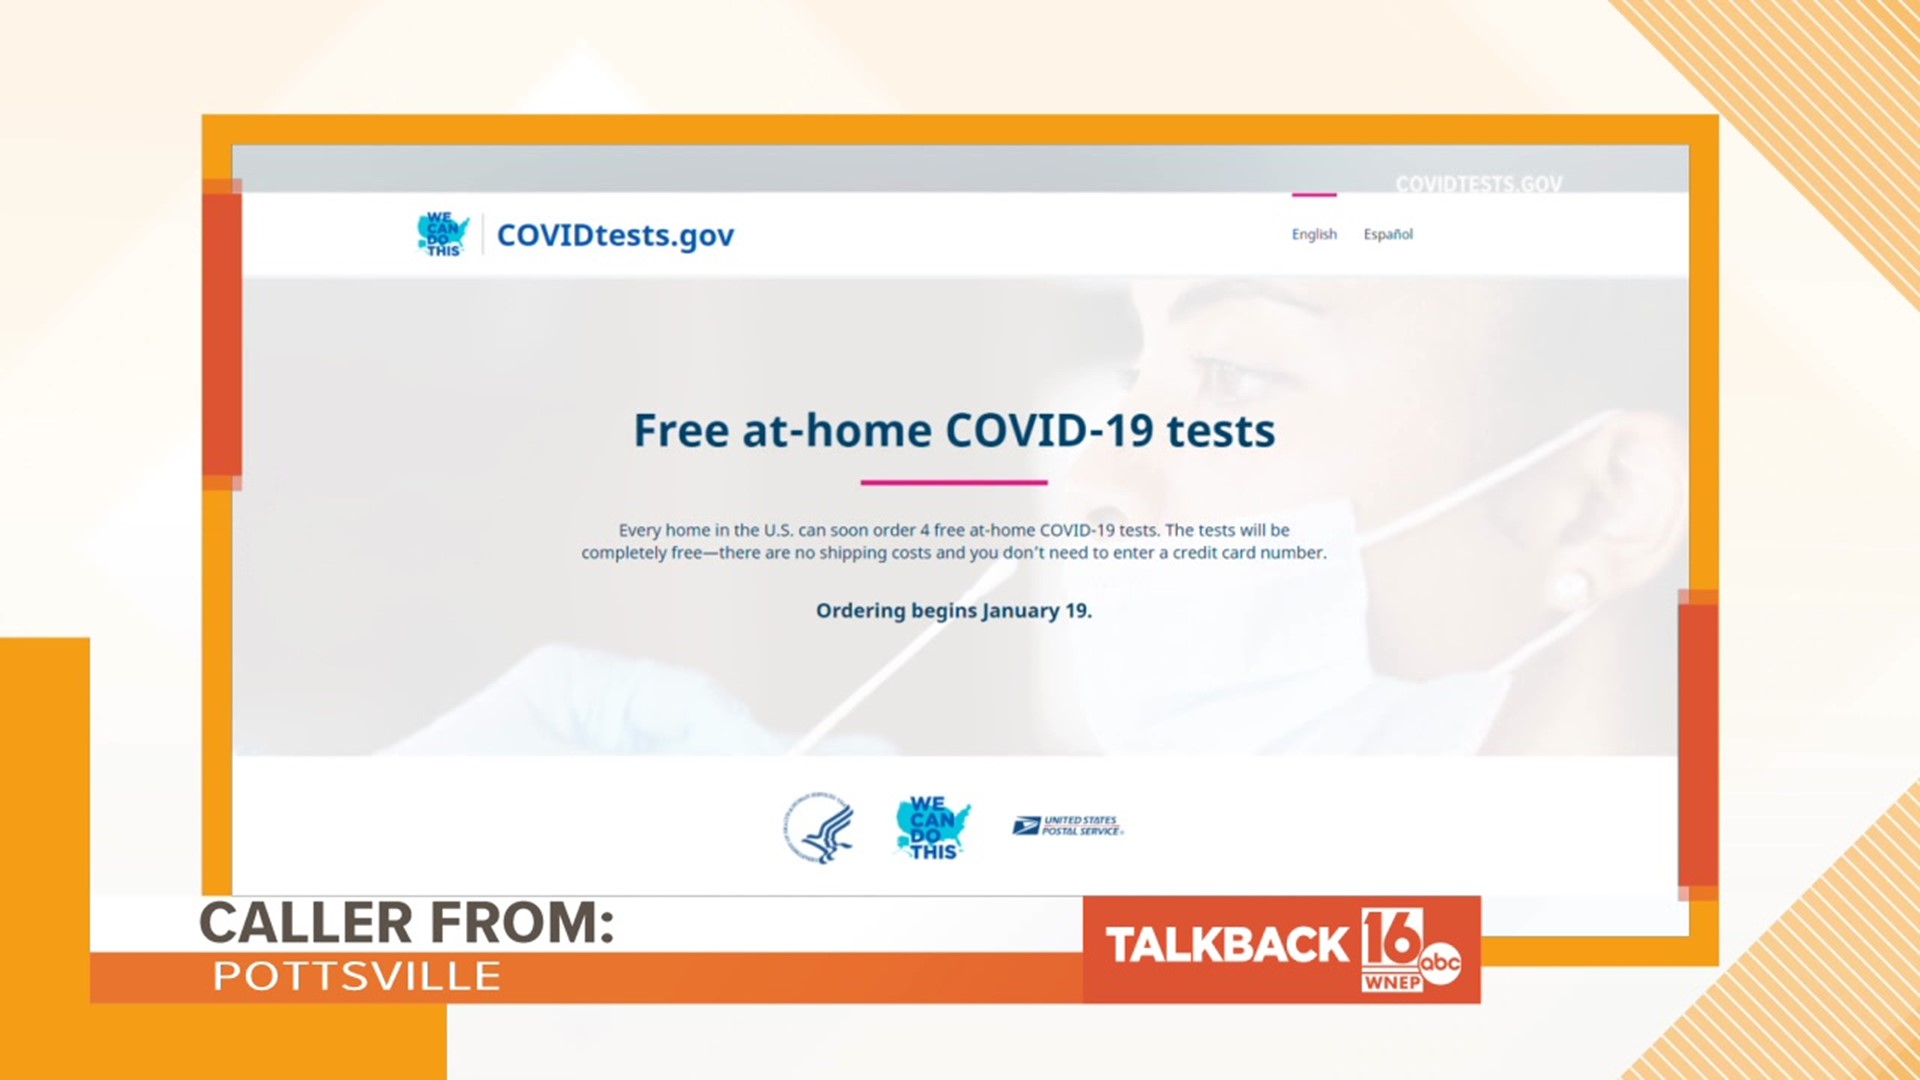 A caller from Pottsville is worried not everyone will be able to get free COVID tests.